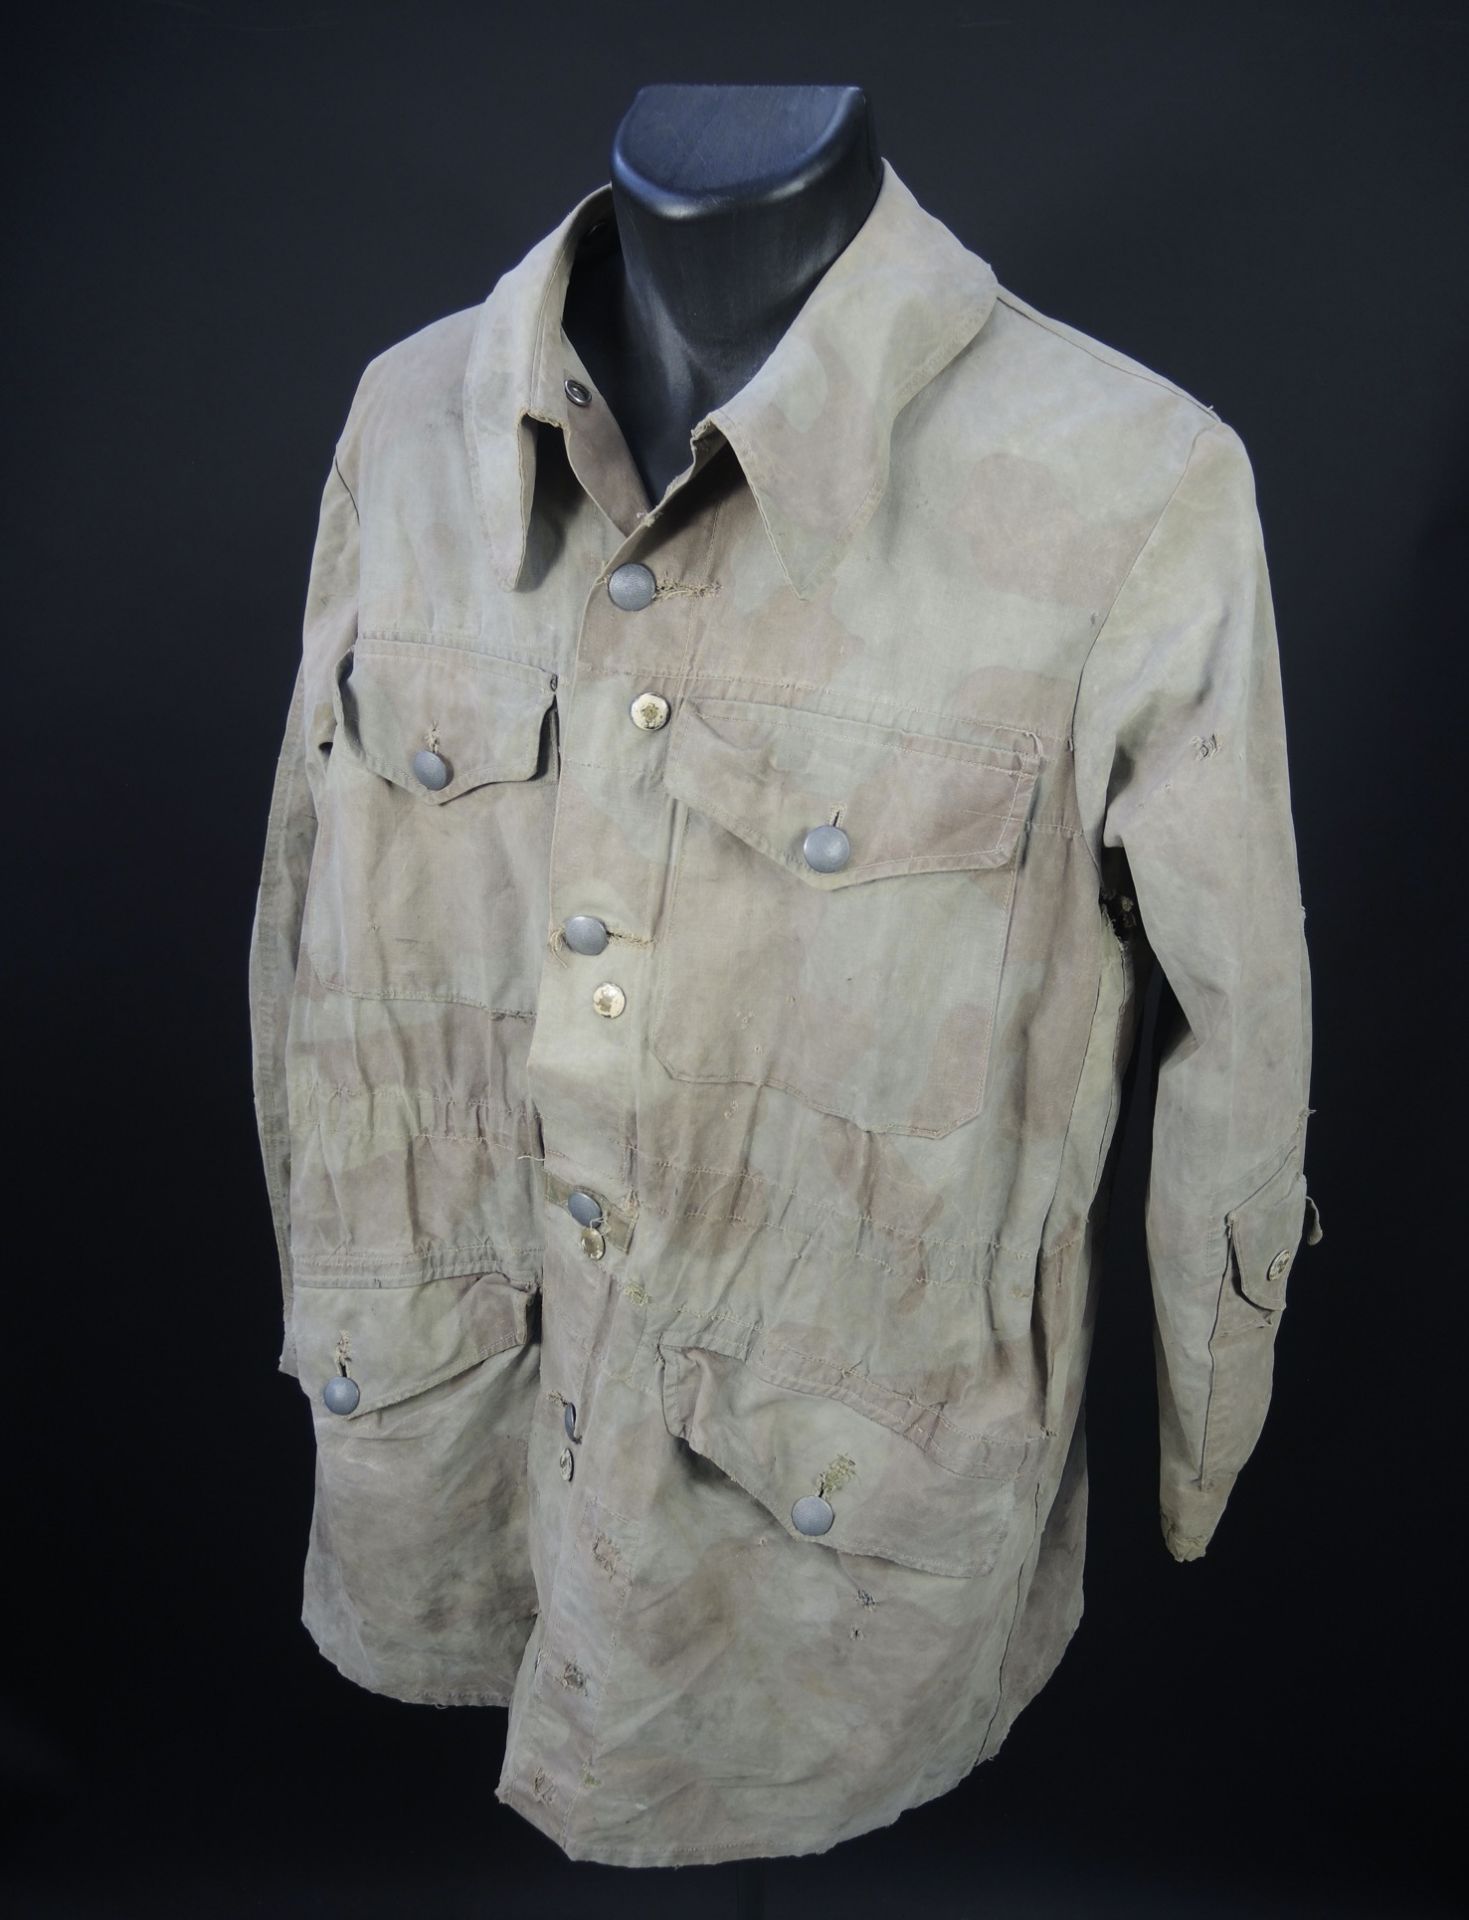 Blouson SS camoufle. Camouflaged SS jacket.